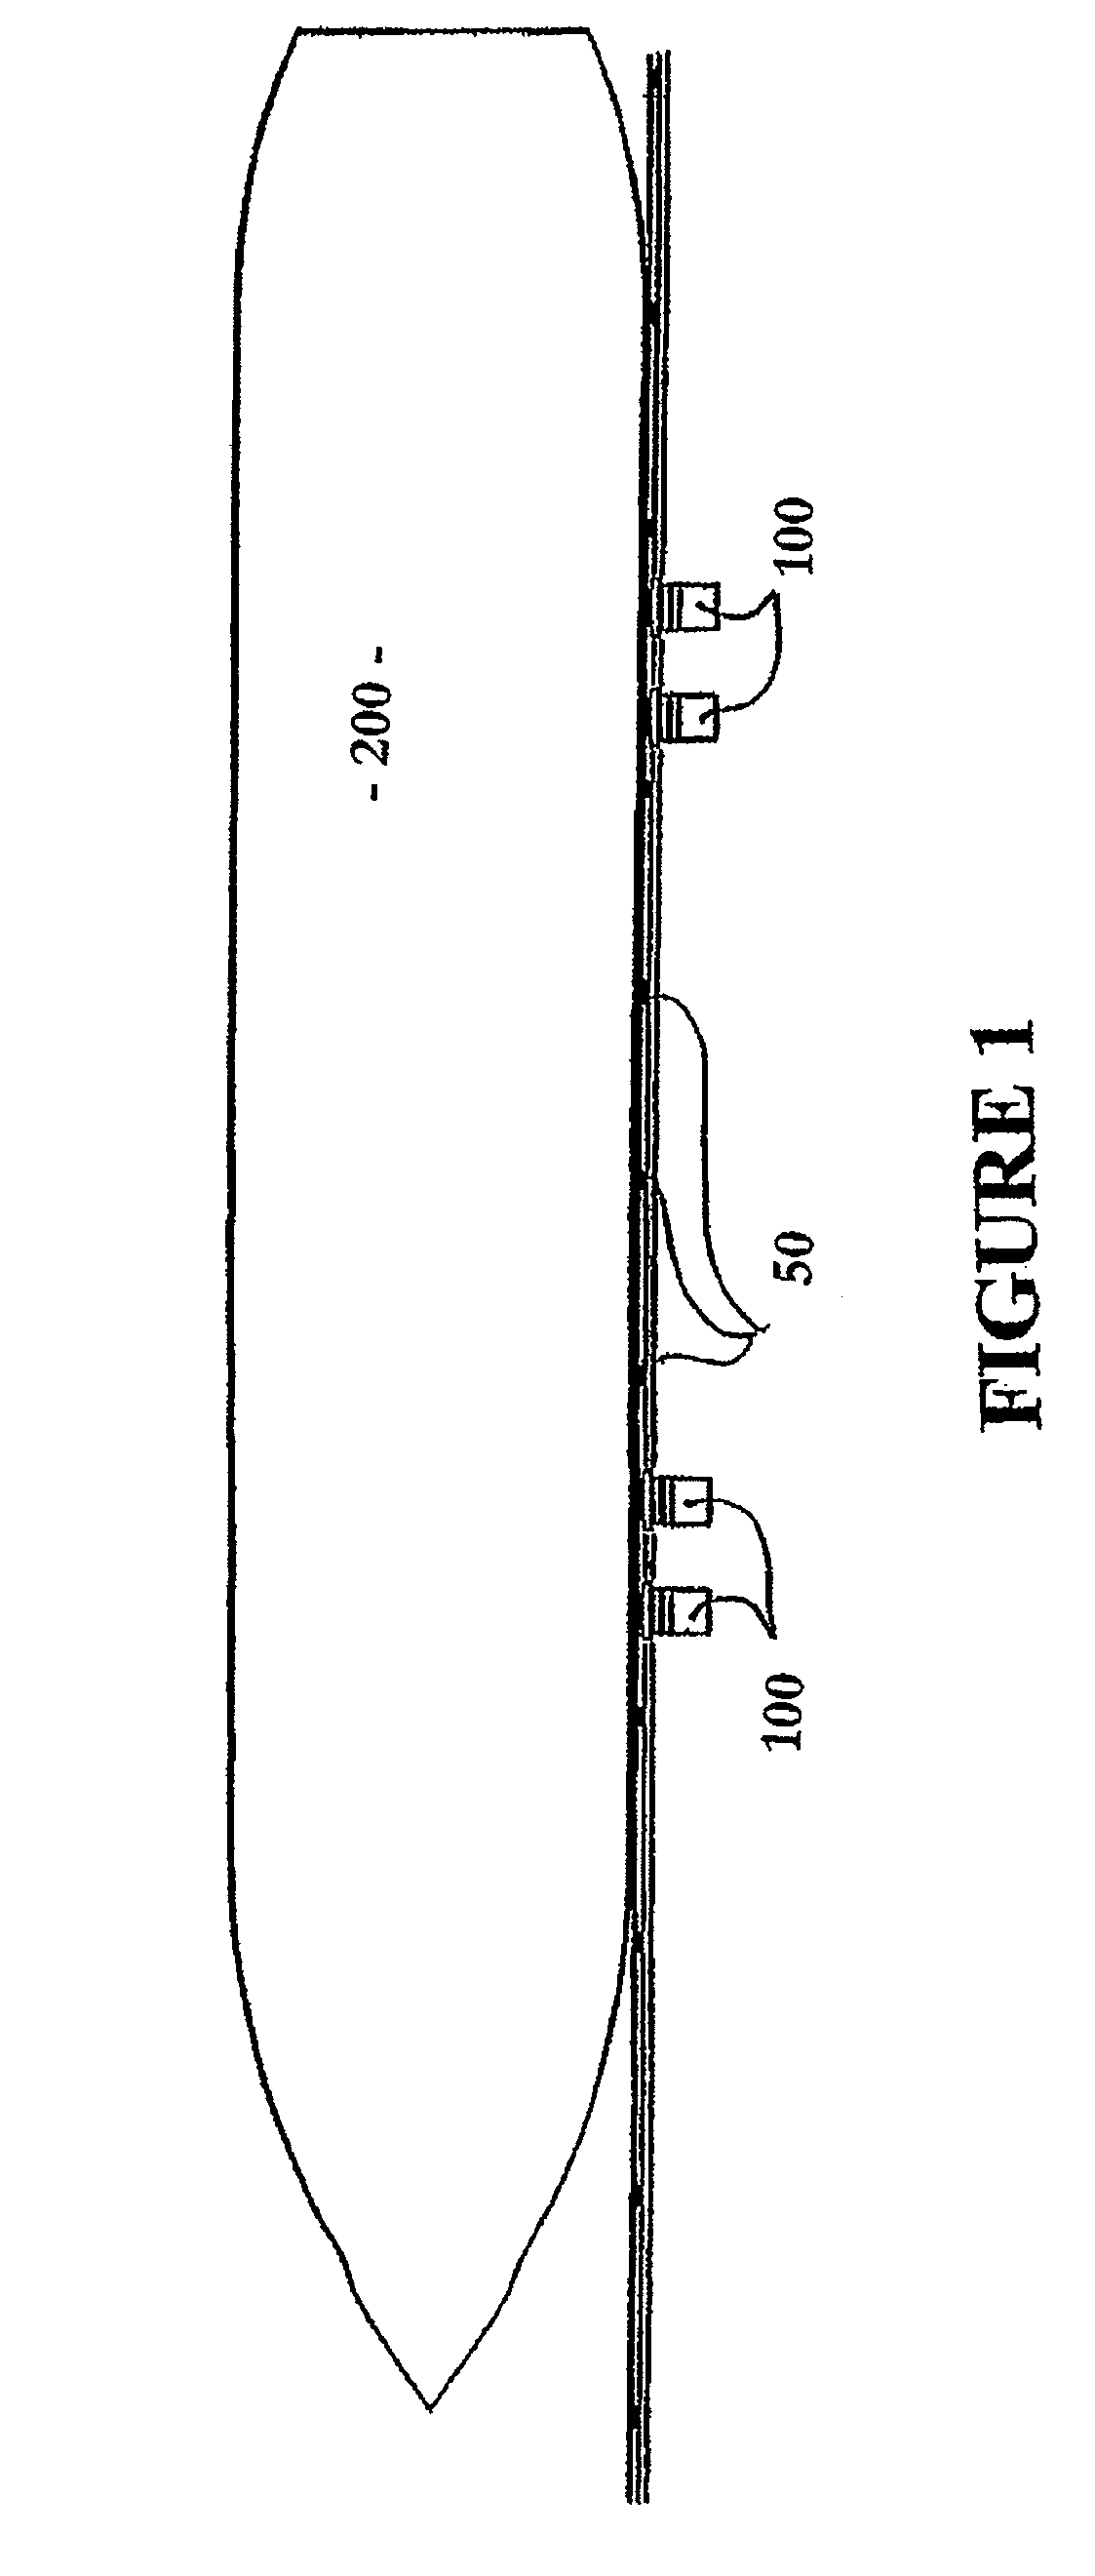 Mooring system with active control